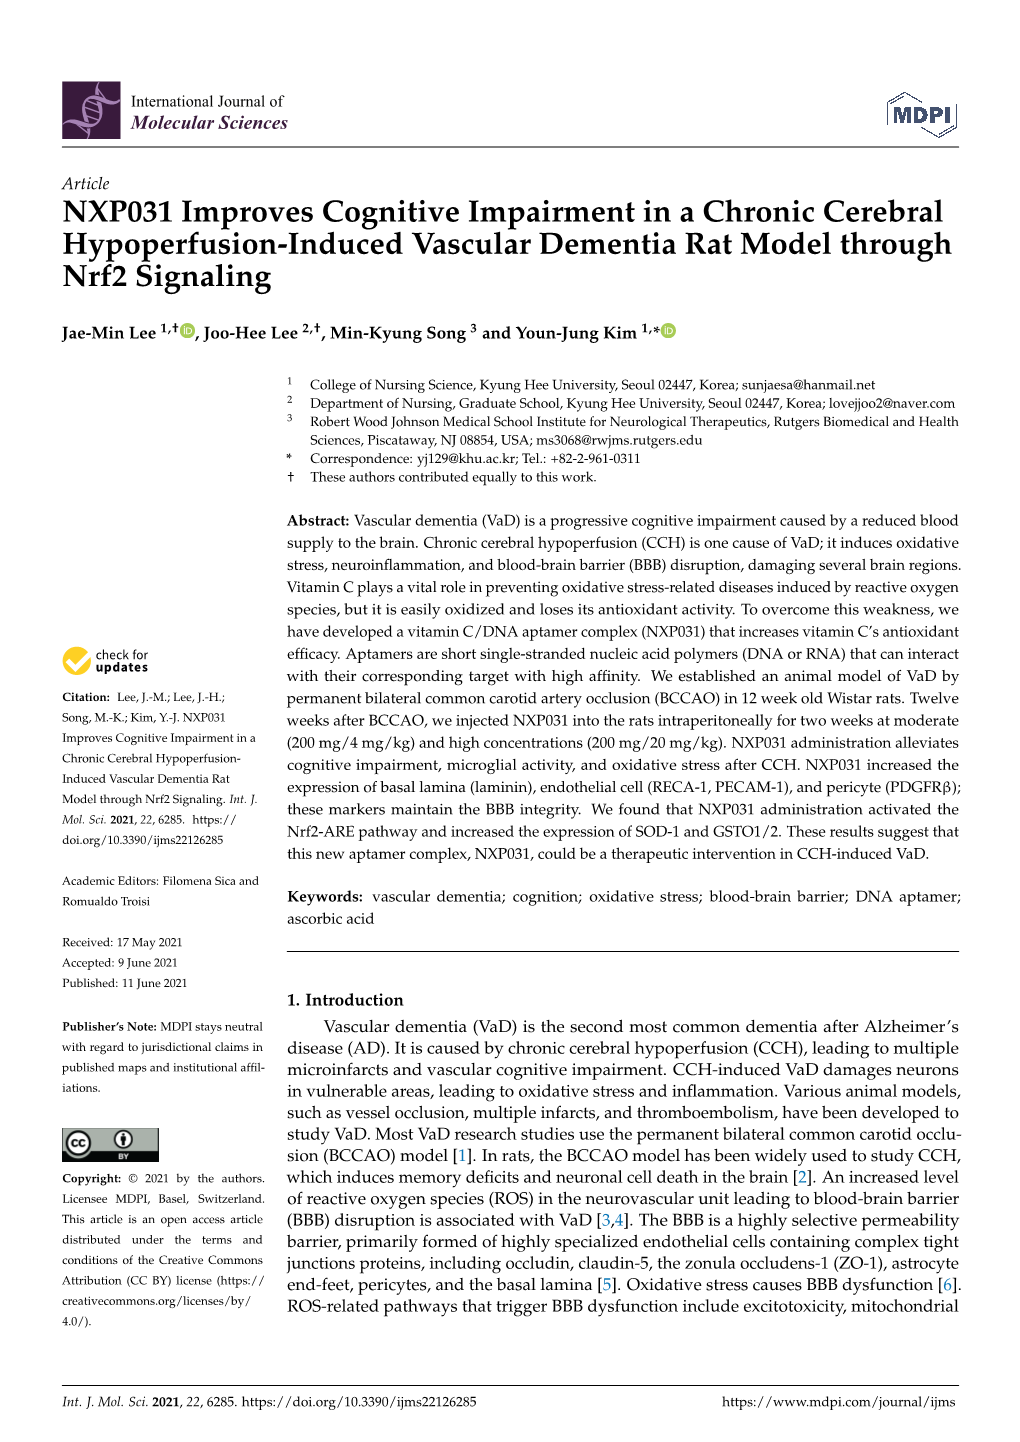 NXP031 Improves Cognitive Impairment in a Chronic Cerebral Hypoperfusion-Induced Vascular Dementia Rat Model Through Nrf2 Signaling